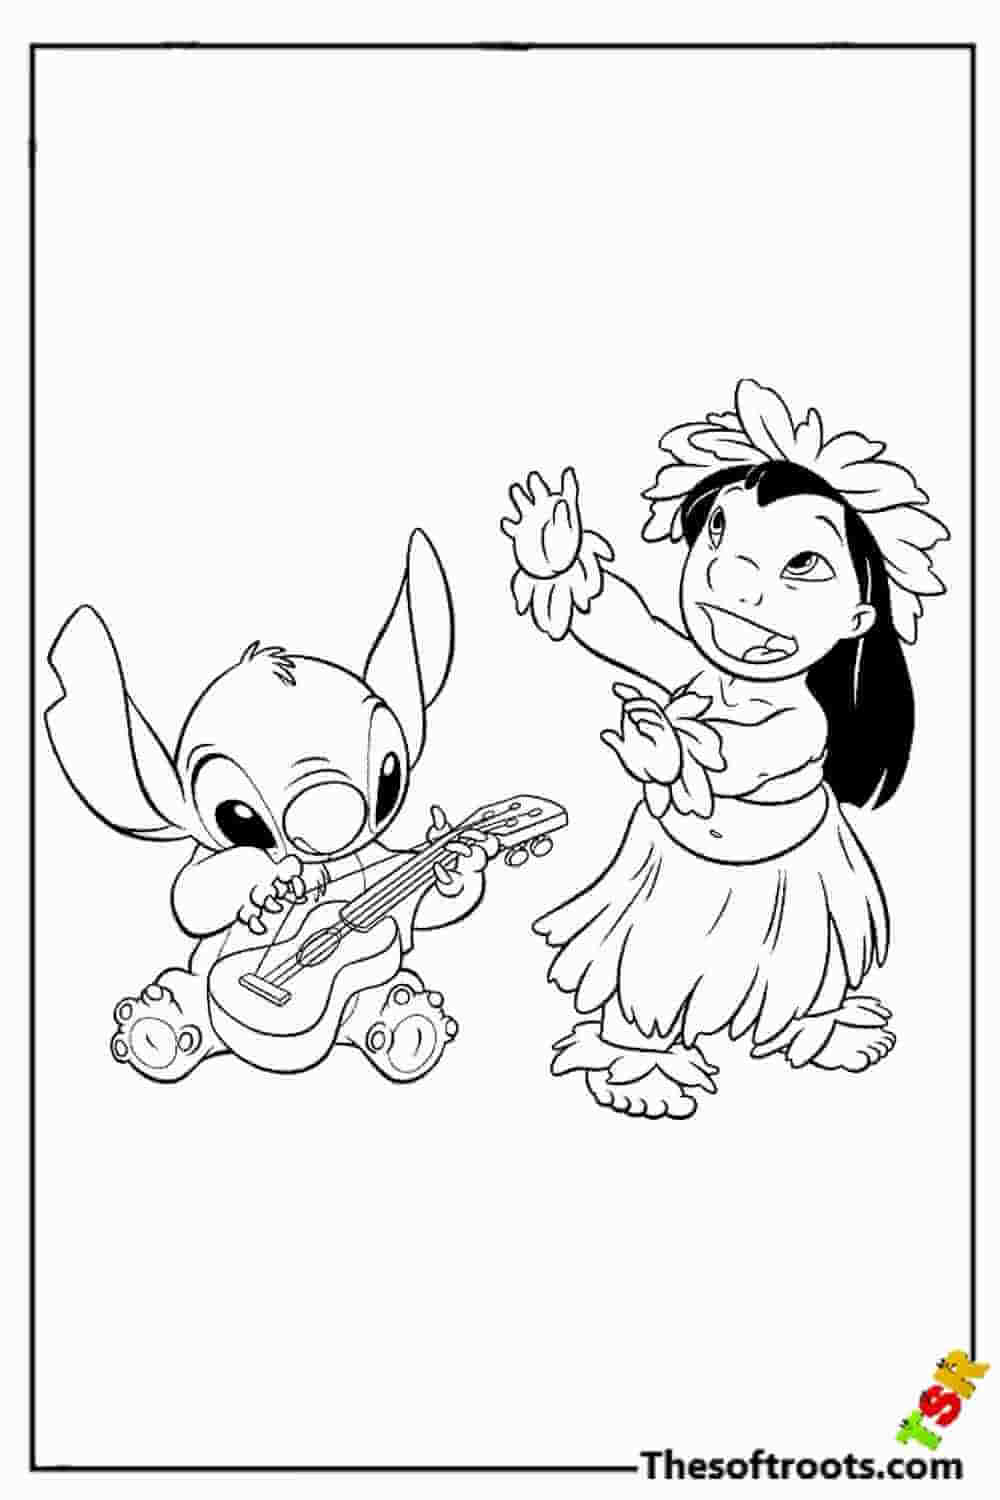 Lilo Playing Guitar coloring pages